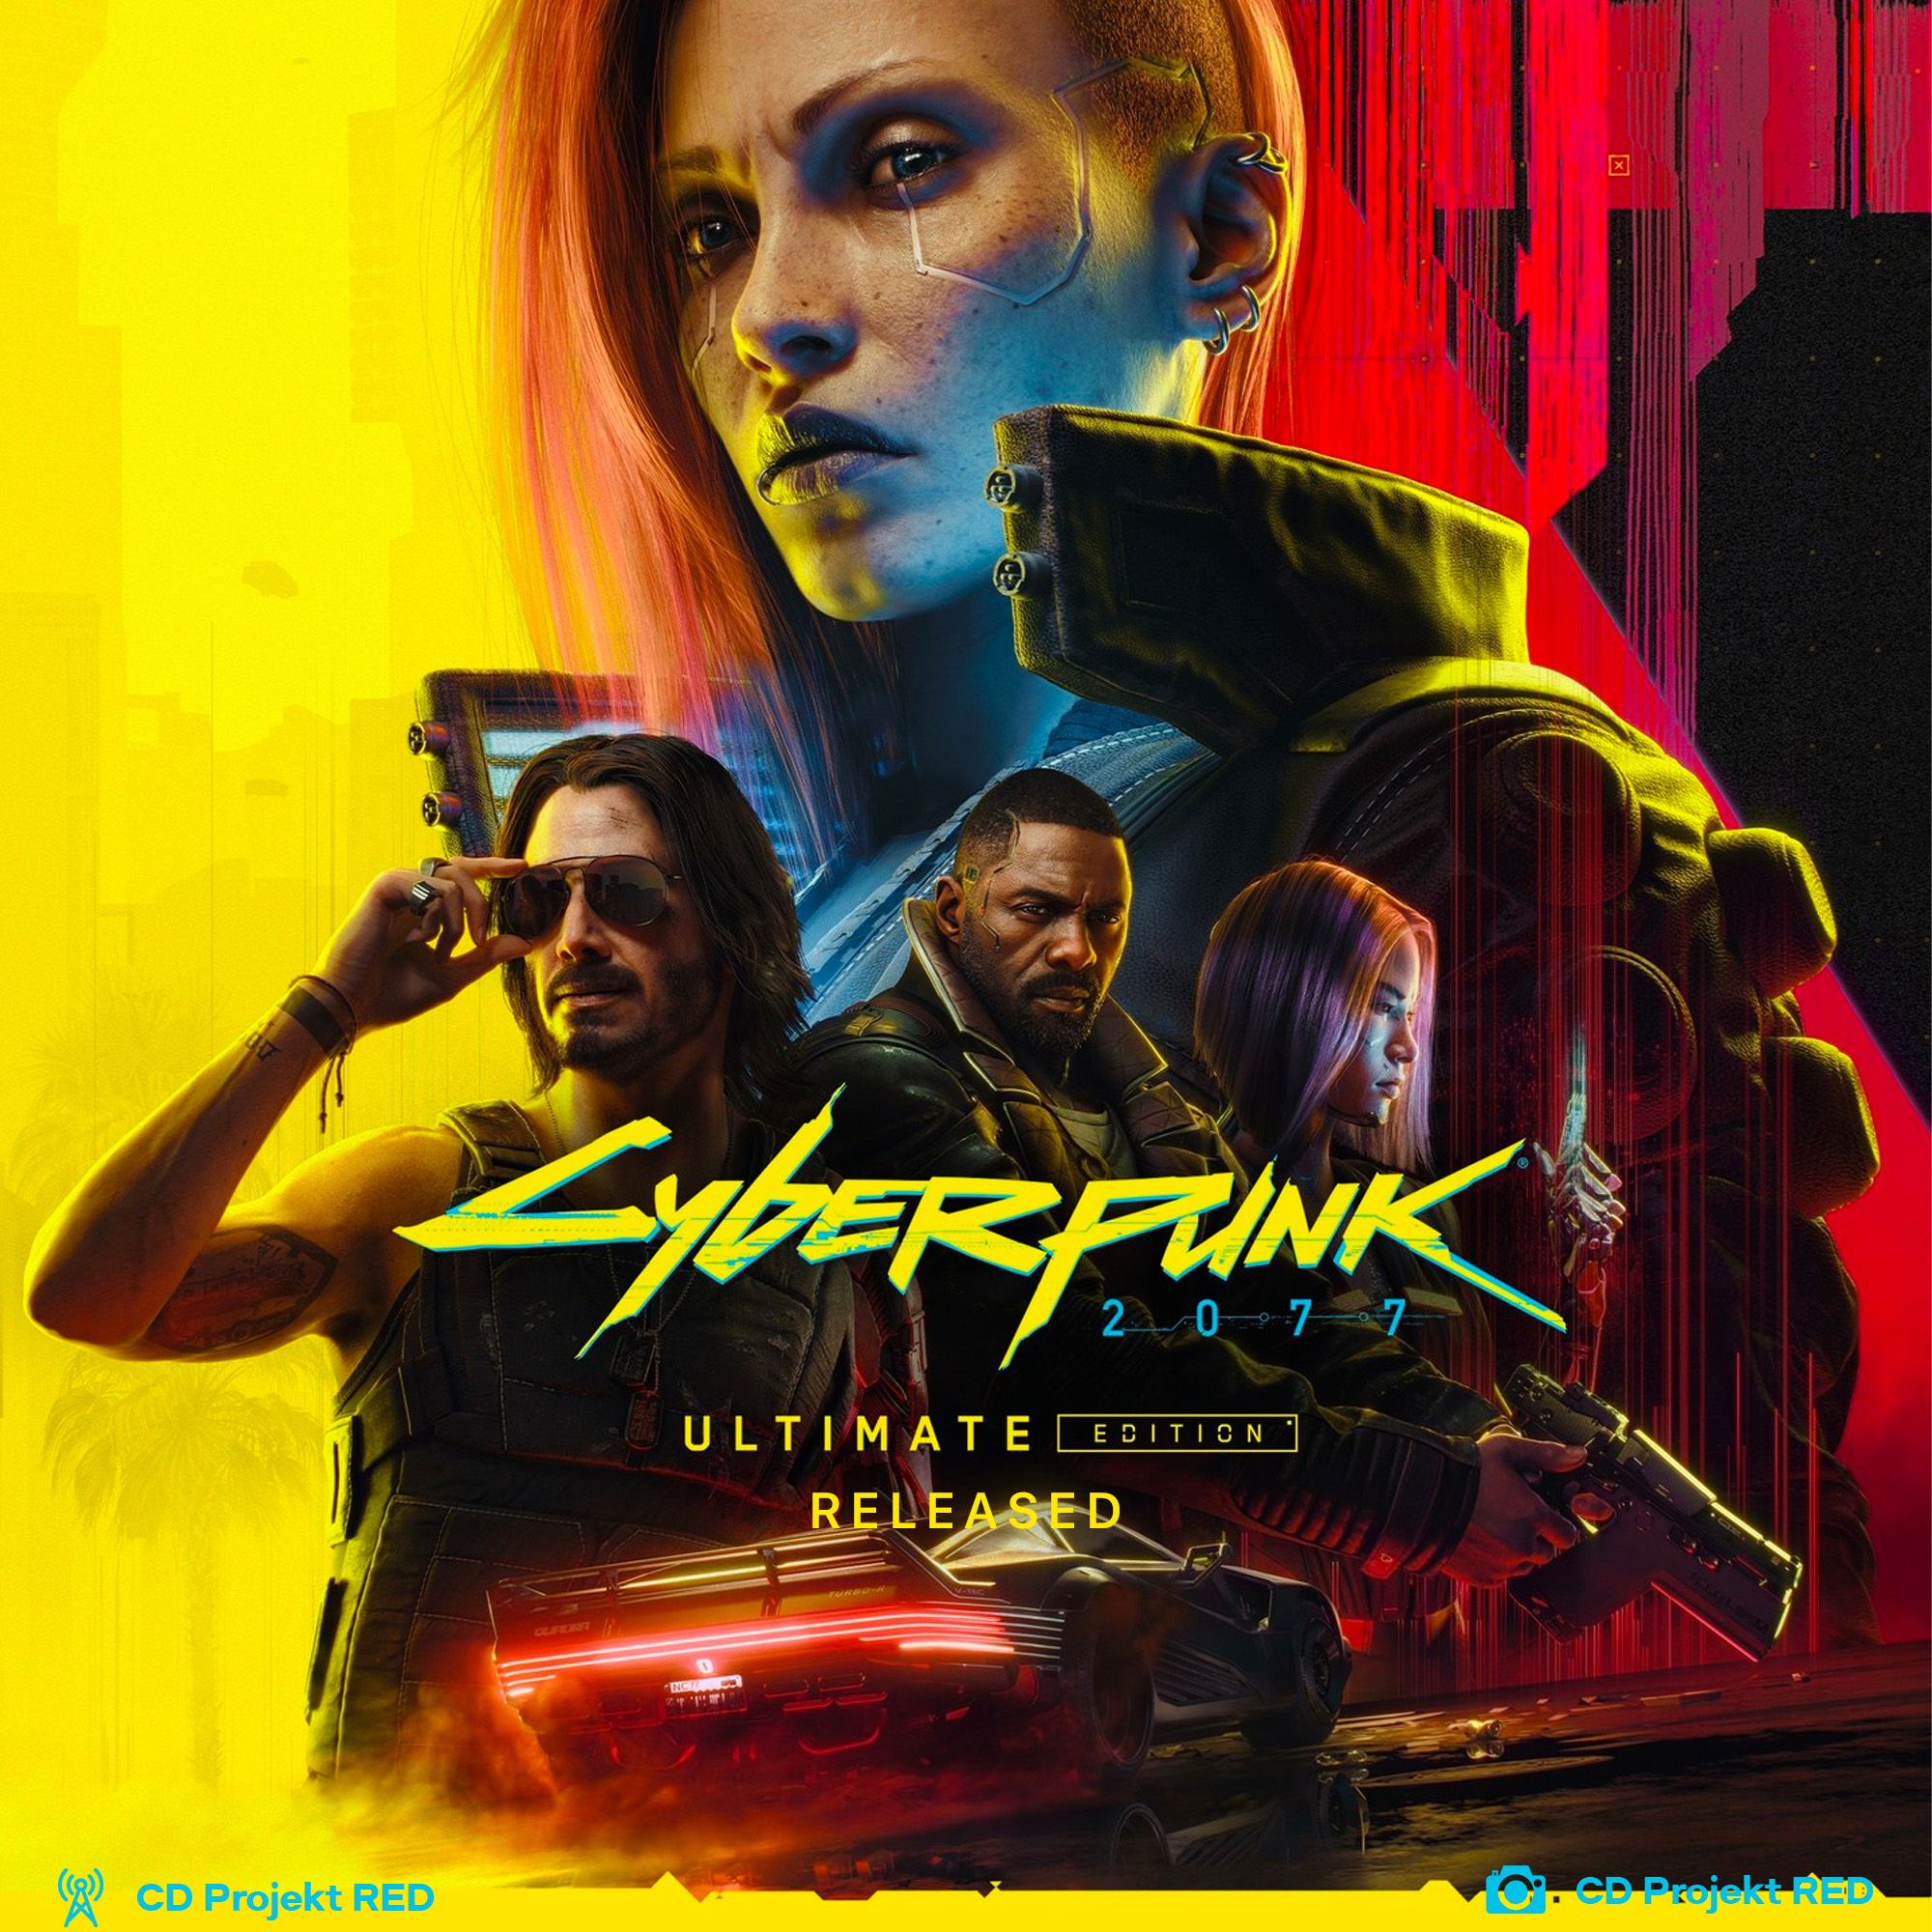 Cyberpunk 2077 Ultimate Edition is out